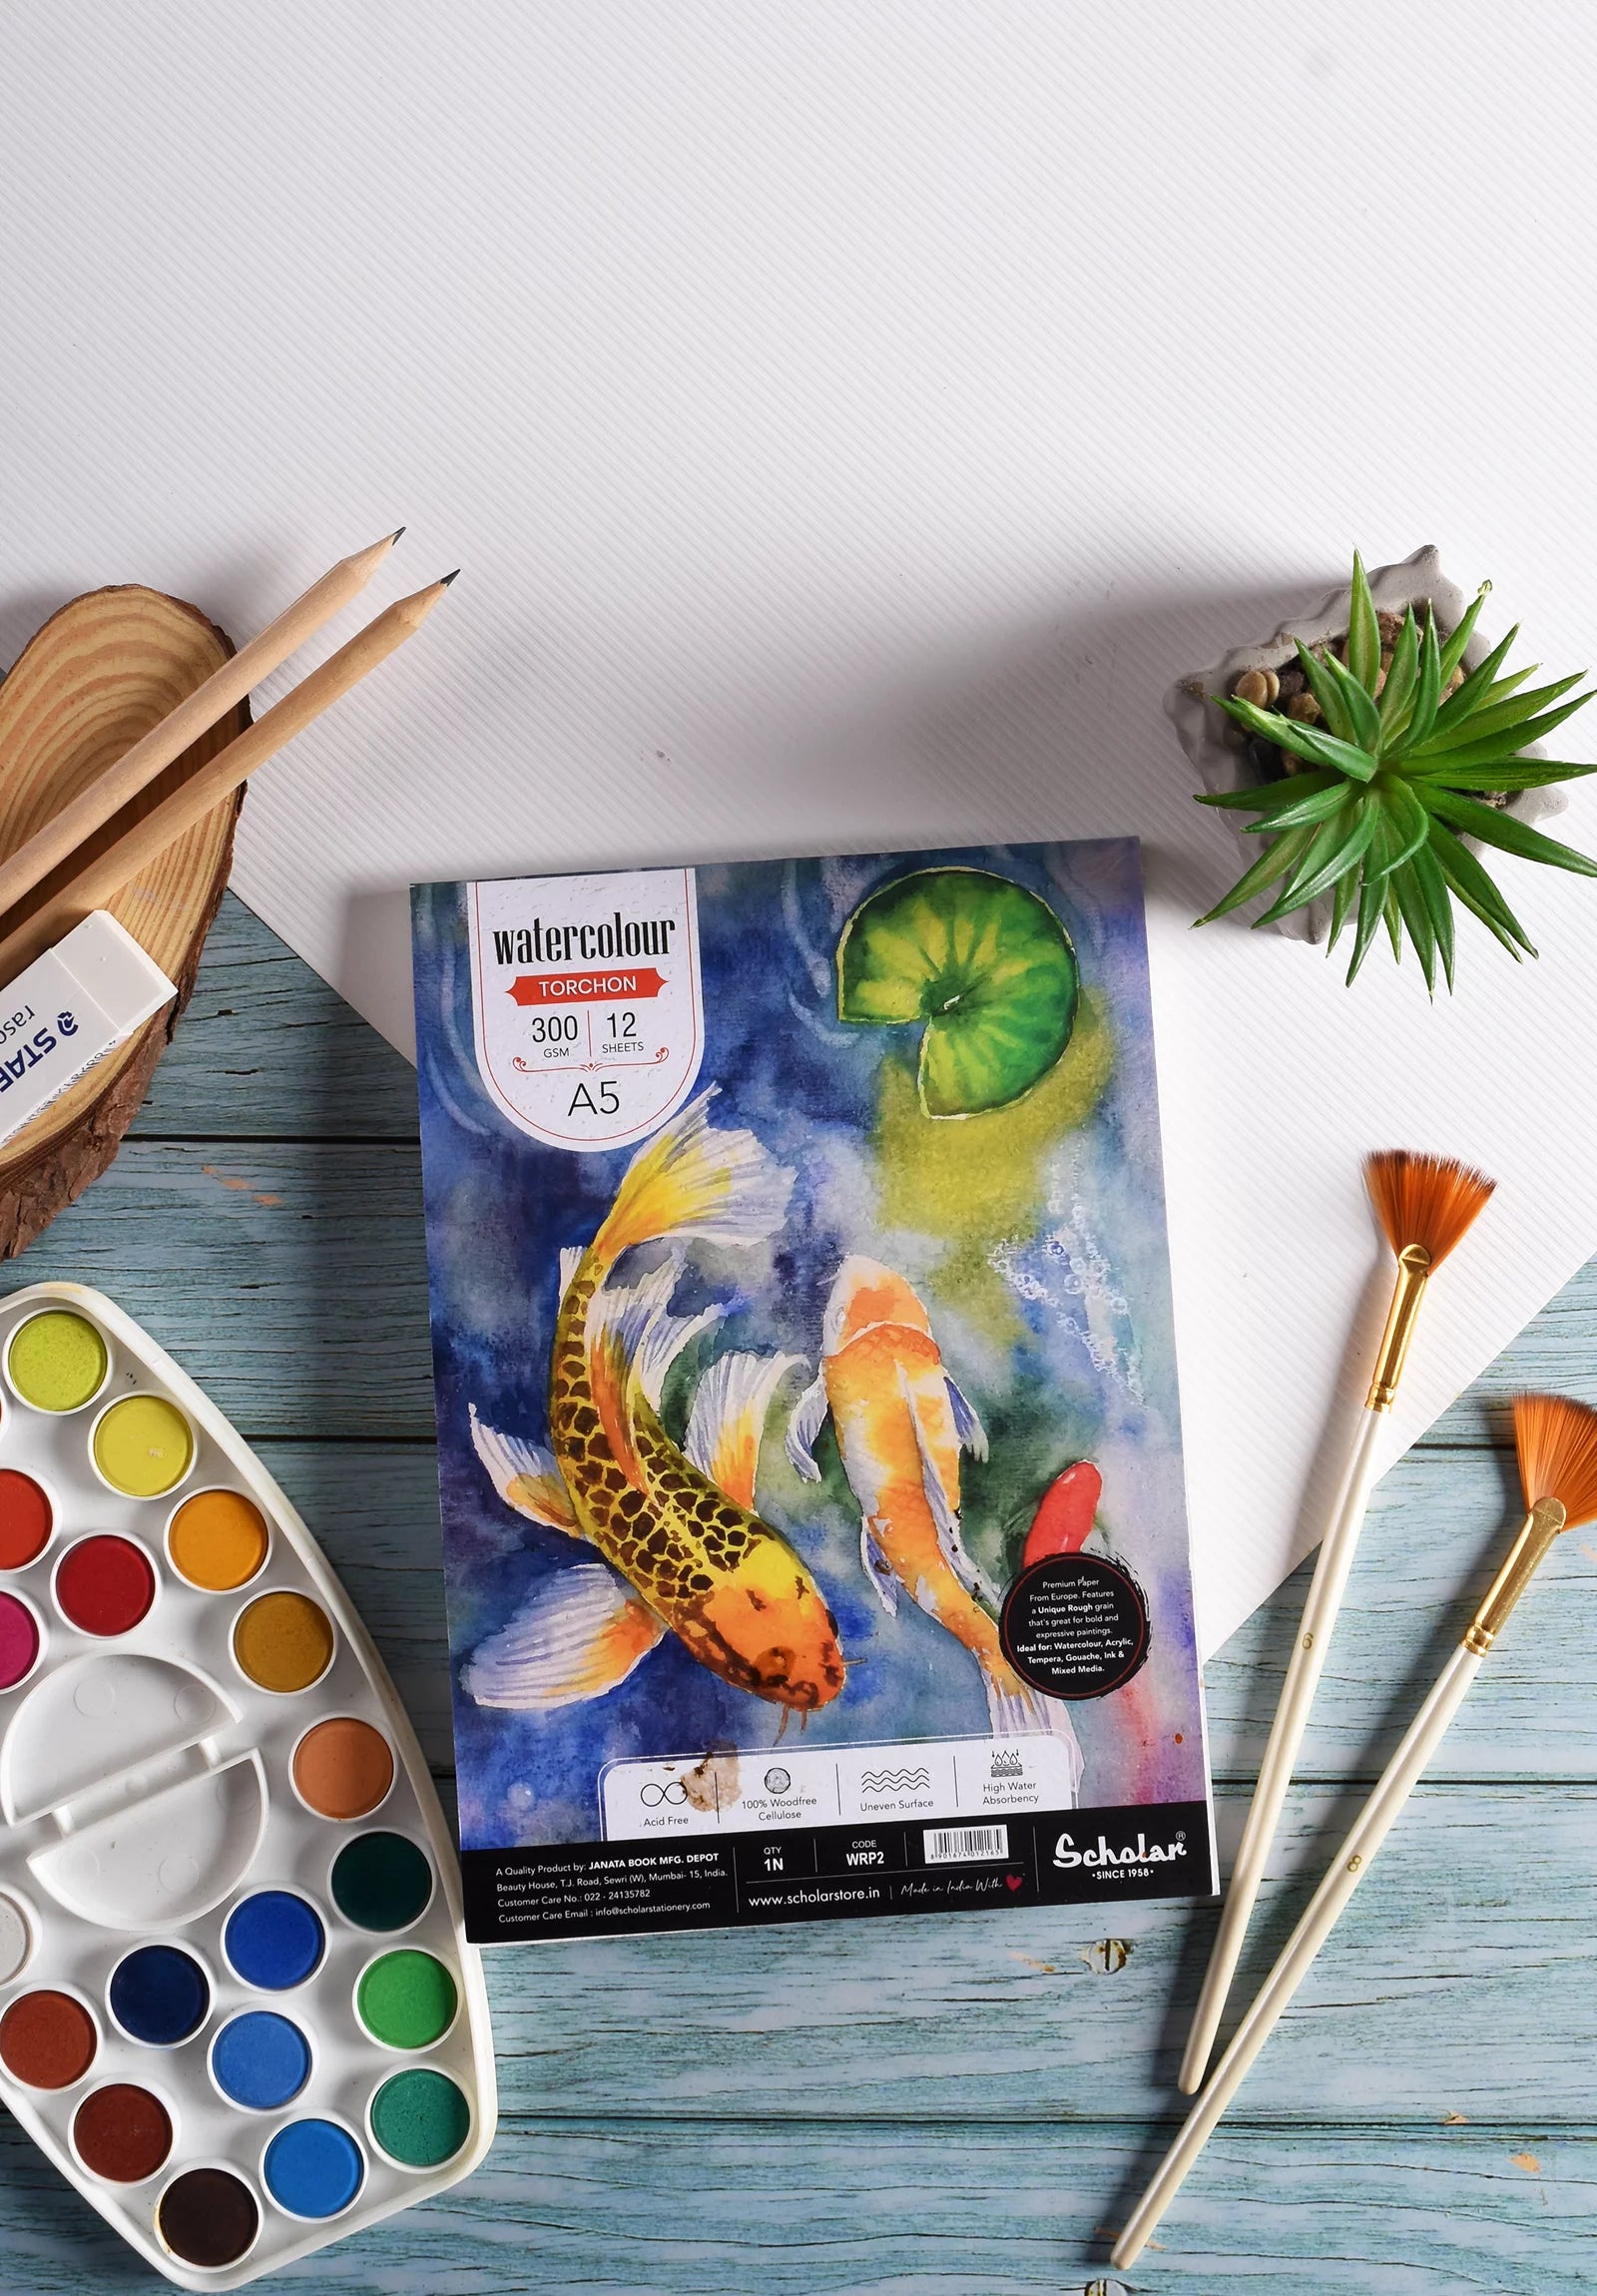 SCHOLAR, Watercolour Pad | 12 sheets | 300 gsm (WRP3).